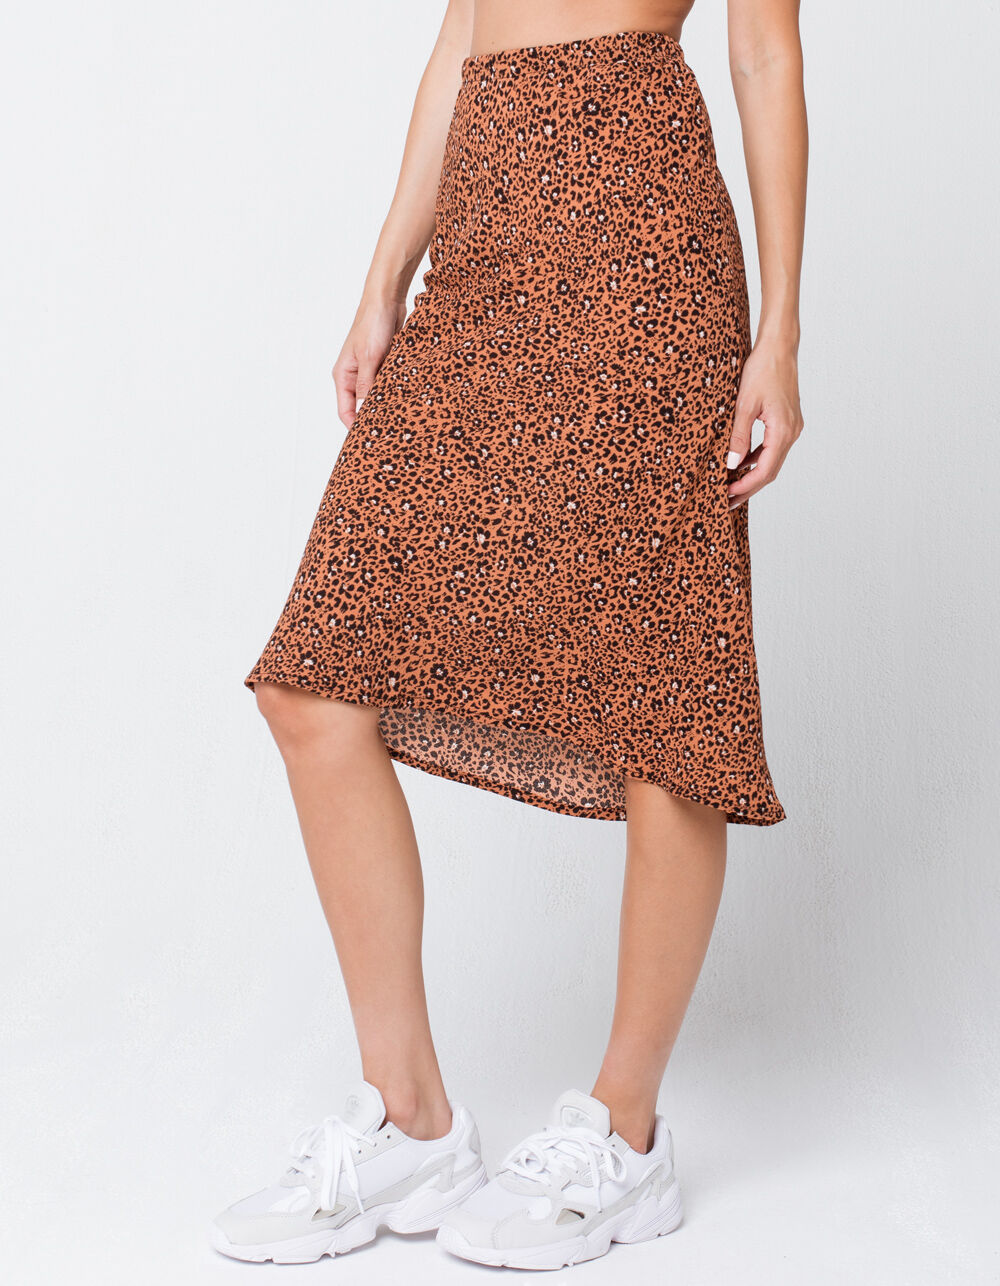 SKY AND SPARROW Leopard Midi Skirt image number 3